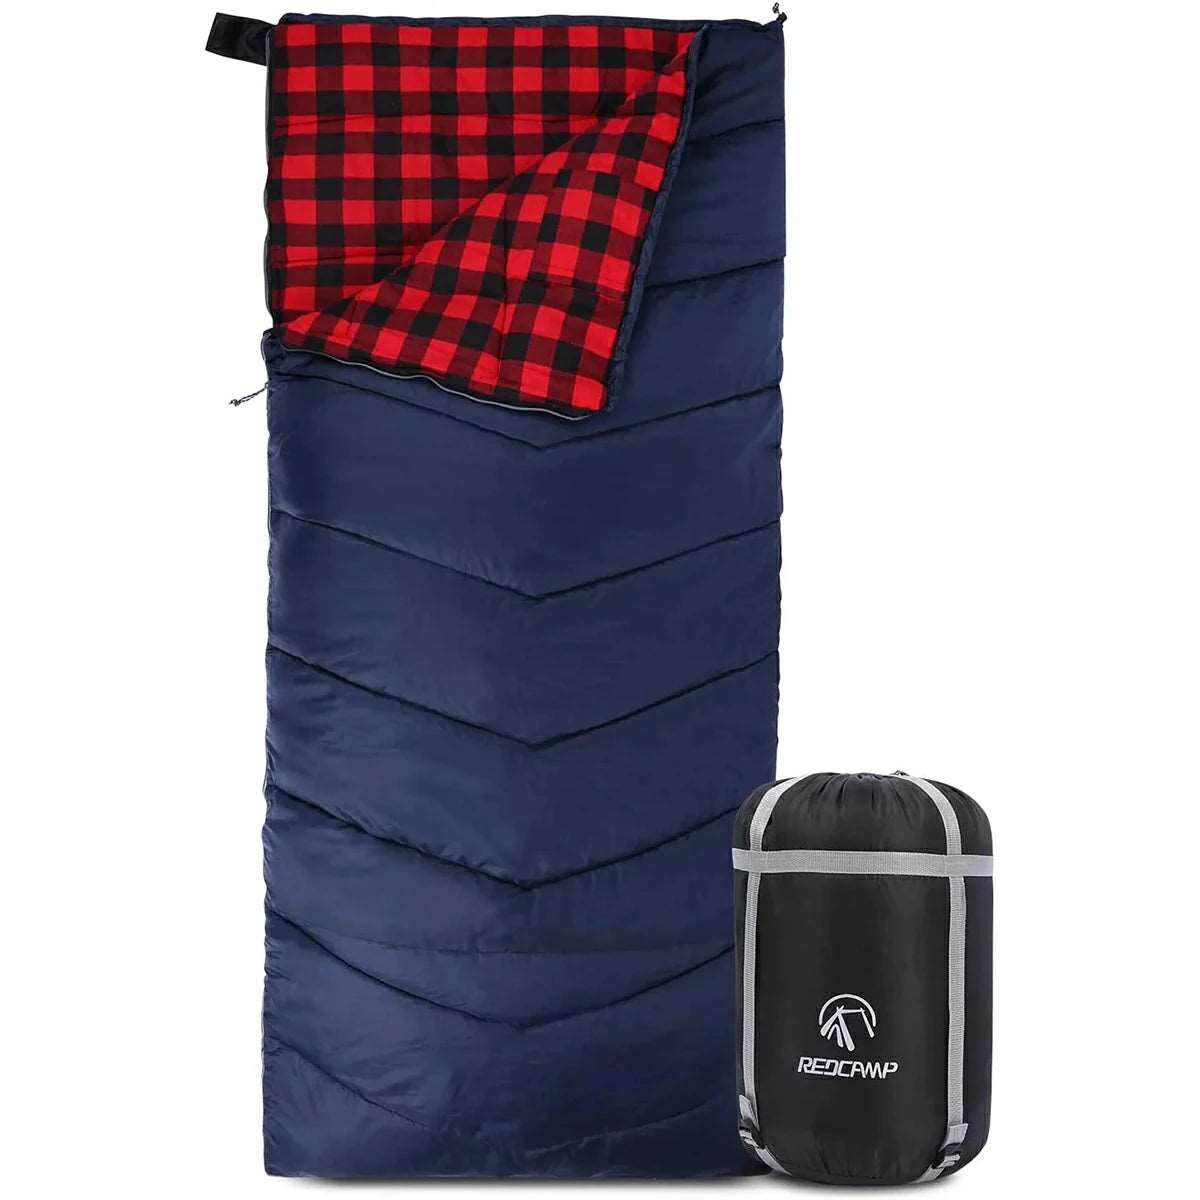 CottonFlannelSleepingBagforCampingwith2-3-4lbsFilling14